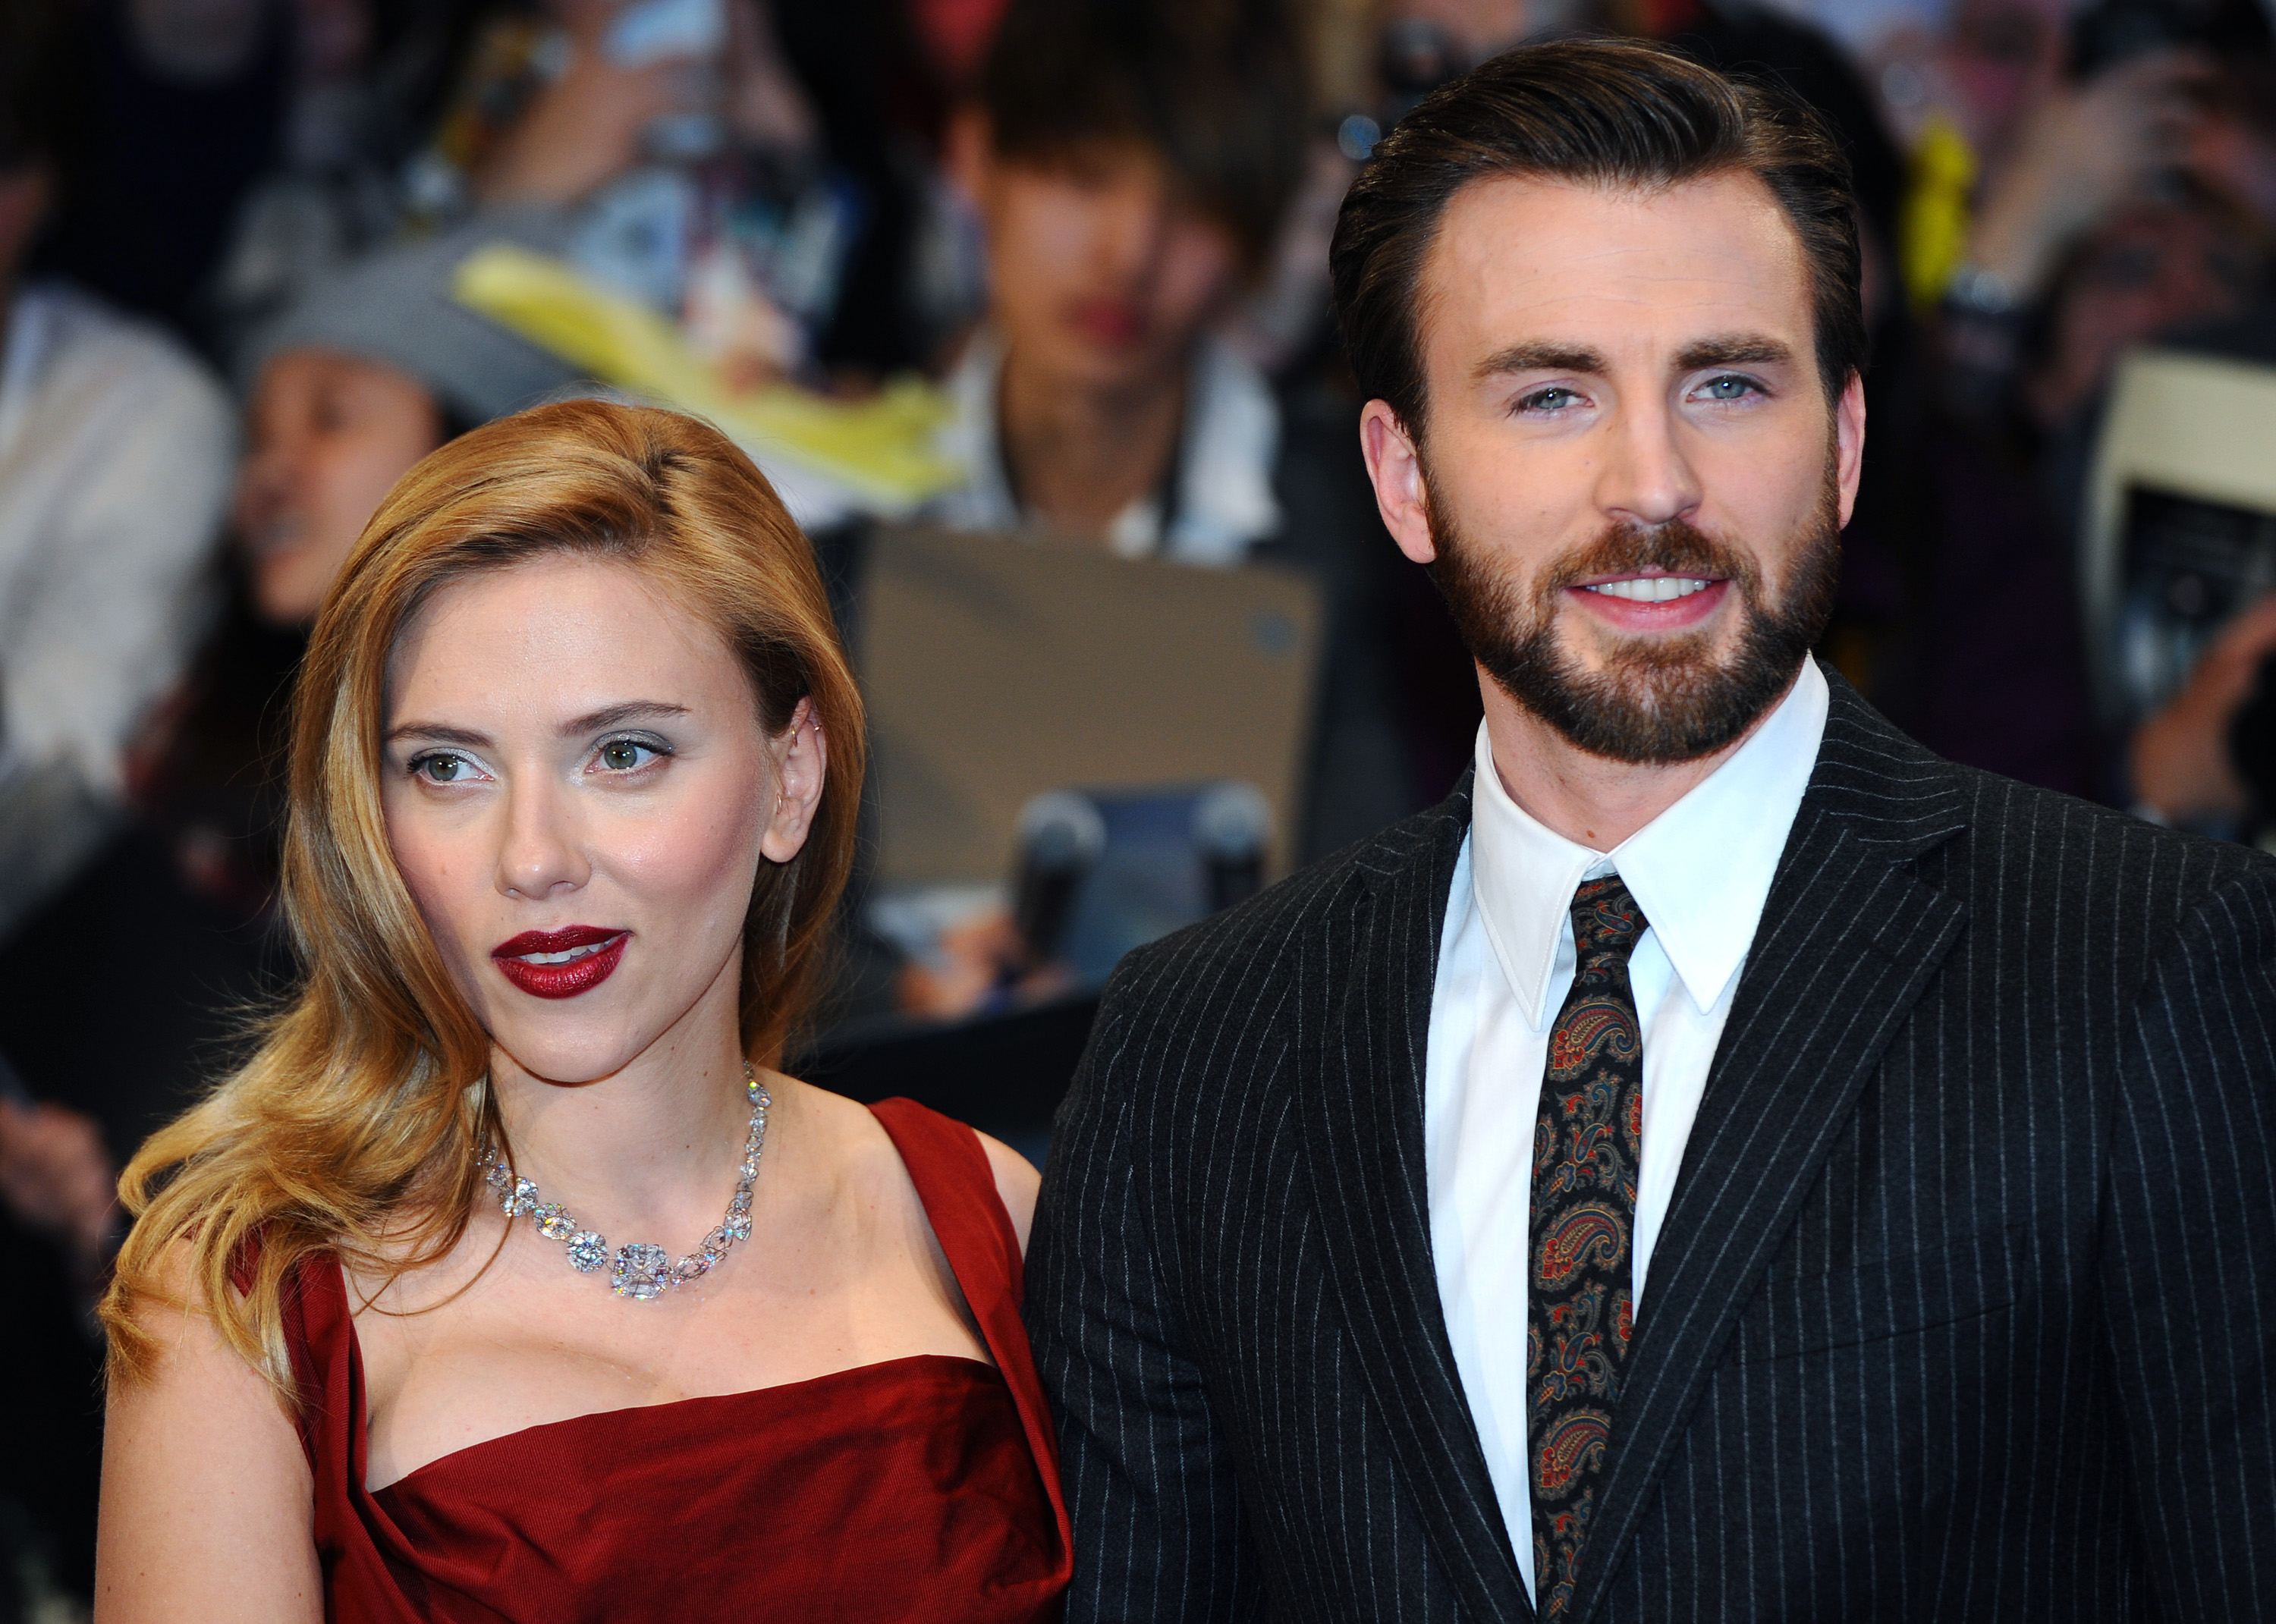 Scarlett Johansson and Chris Evans 'Ghosted' wearing red dress and suit and tie at premiere